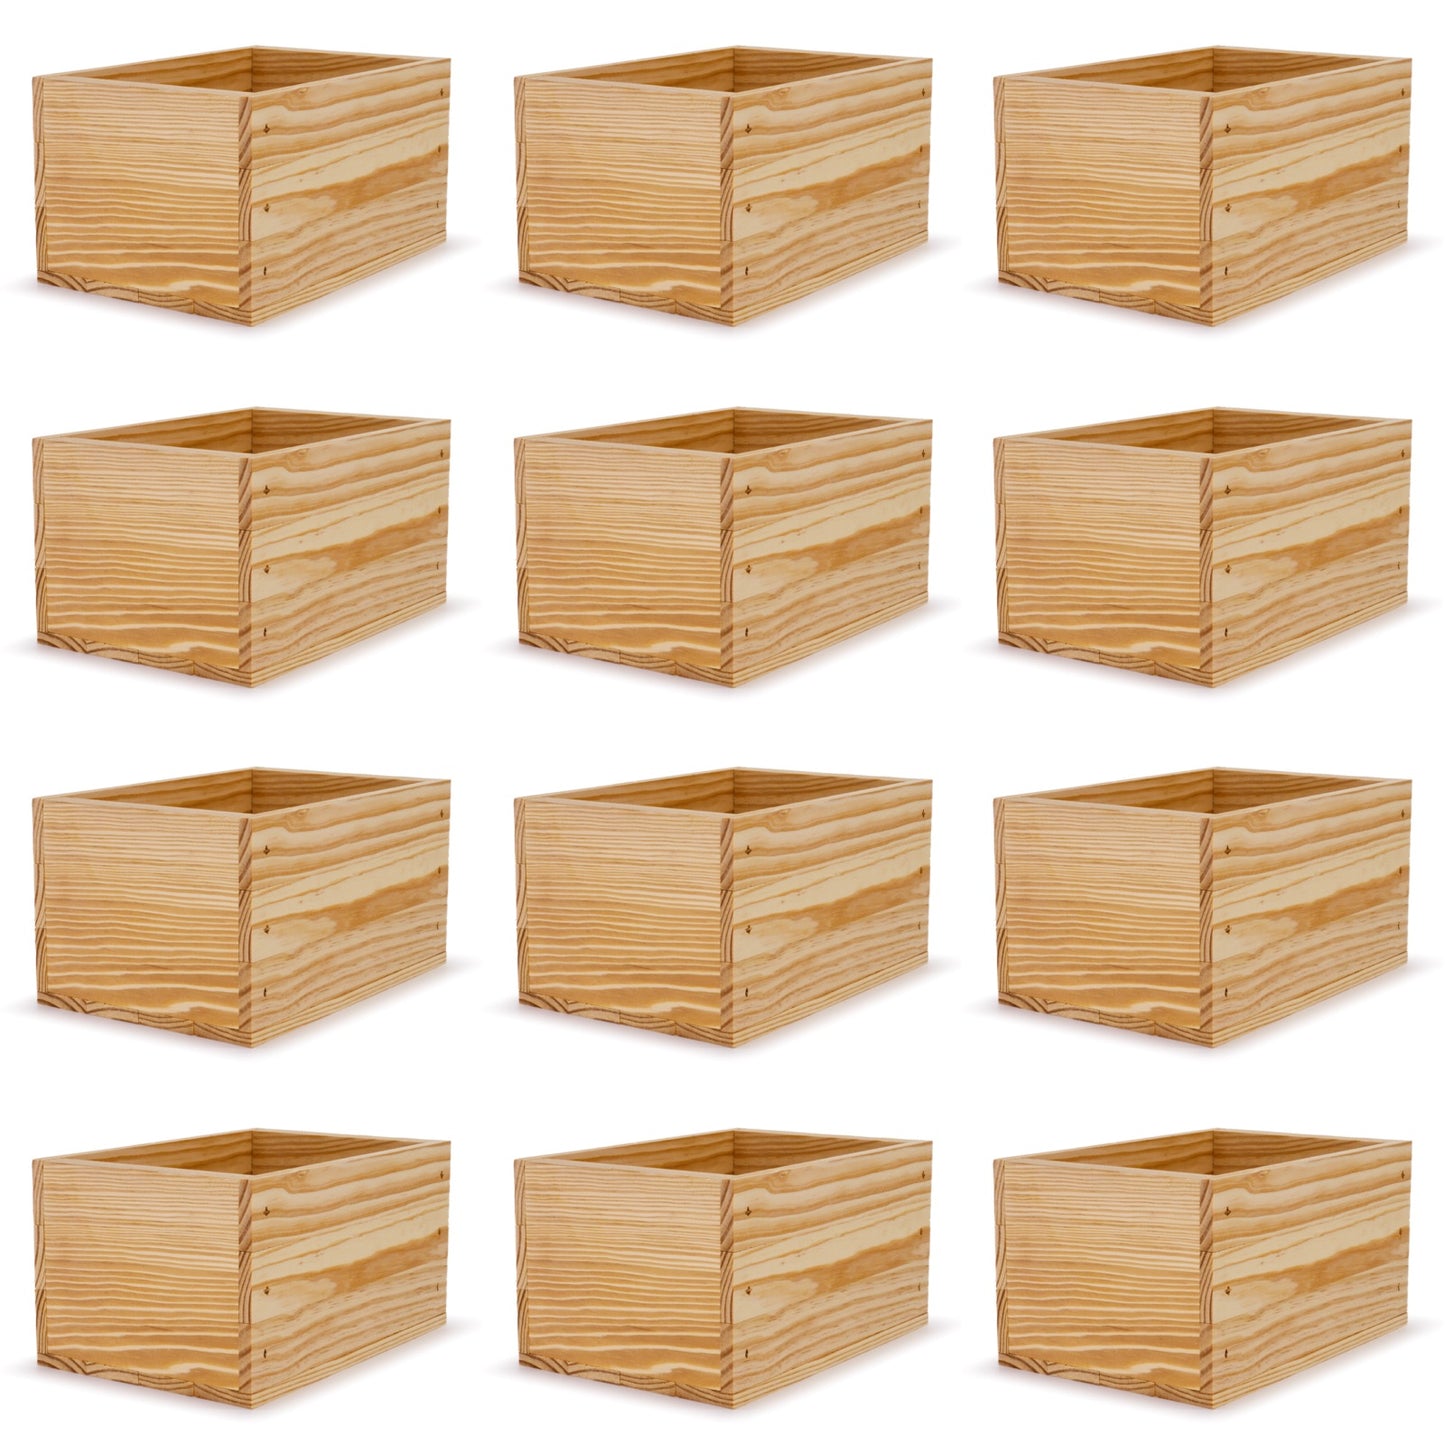 12 Small wooden crates 9x6.25x5.25